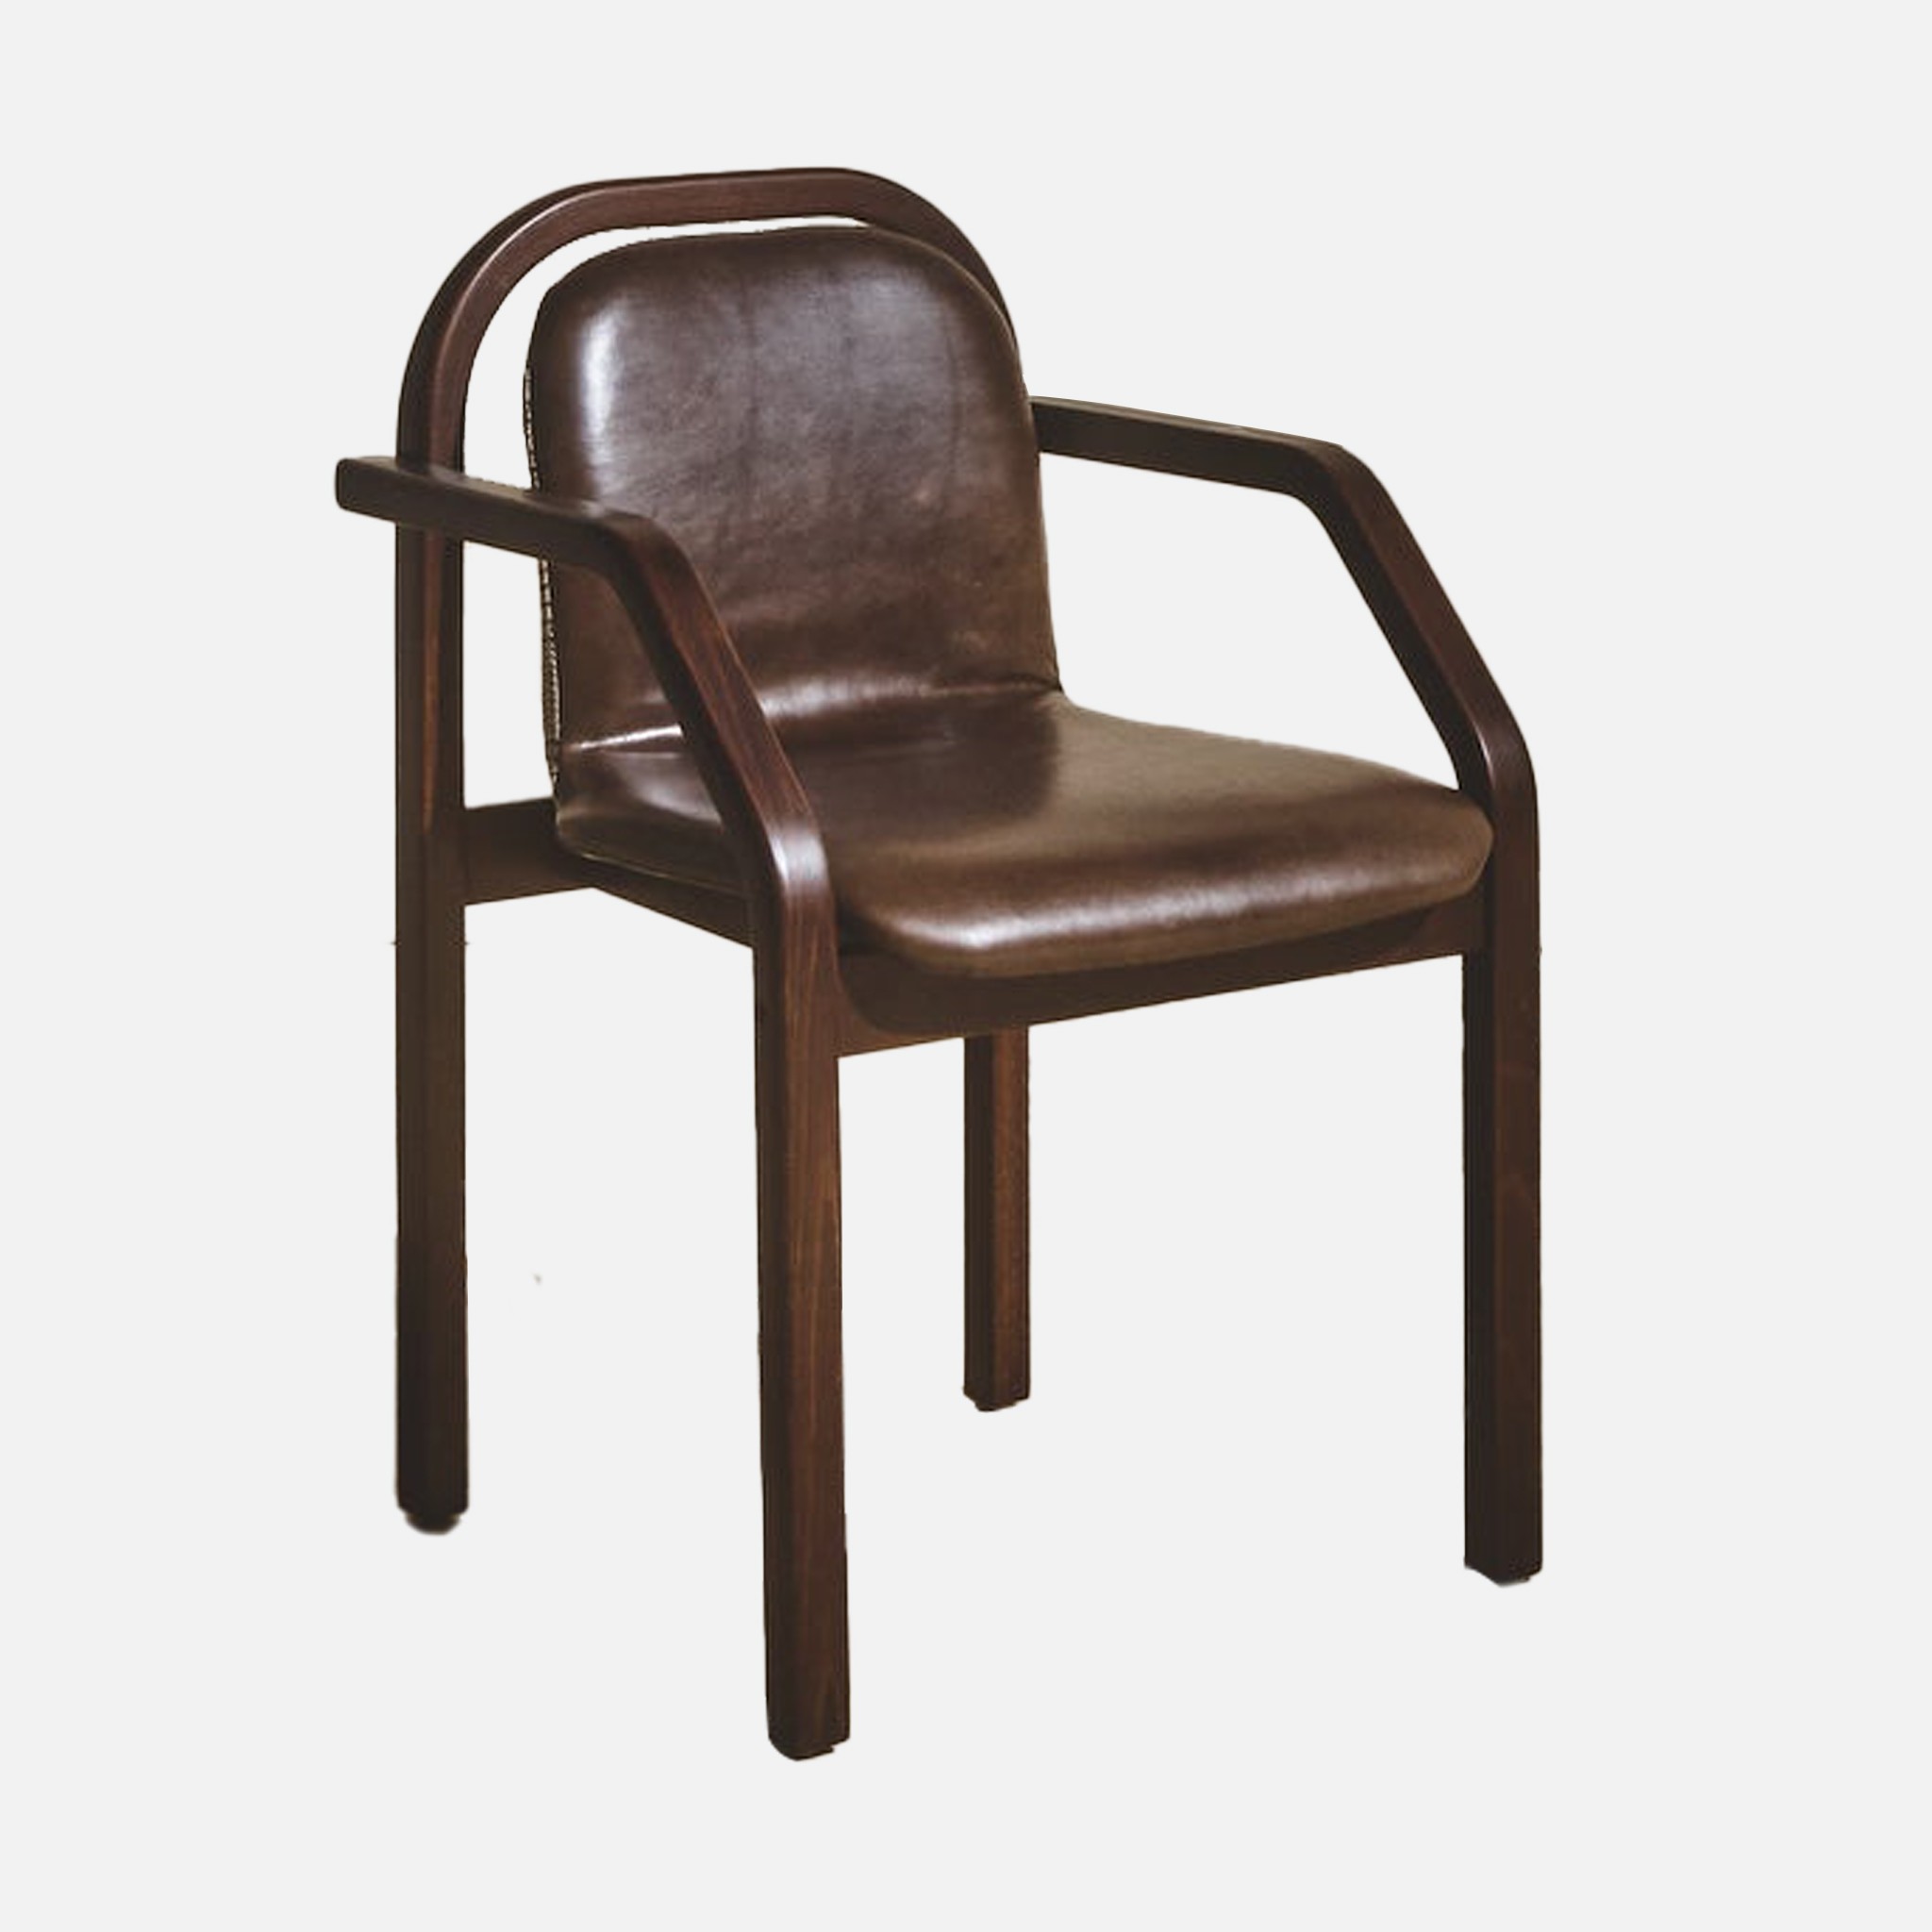 a wooden chair with a brown leather seat